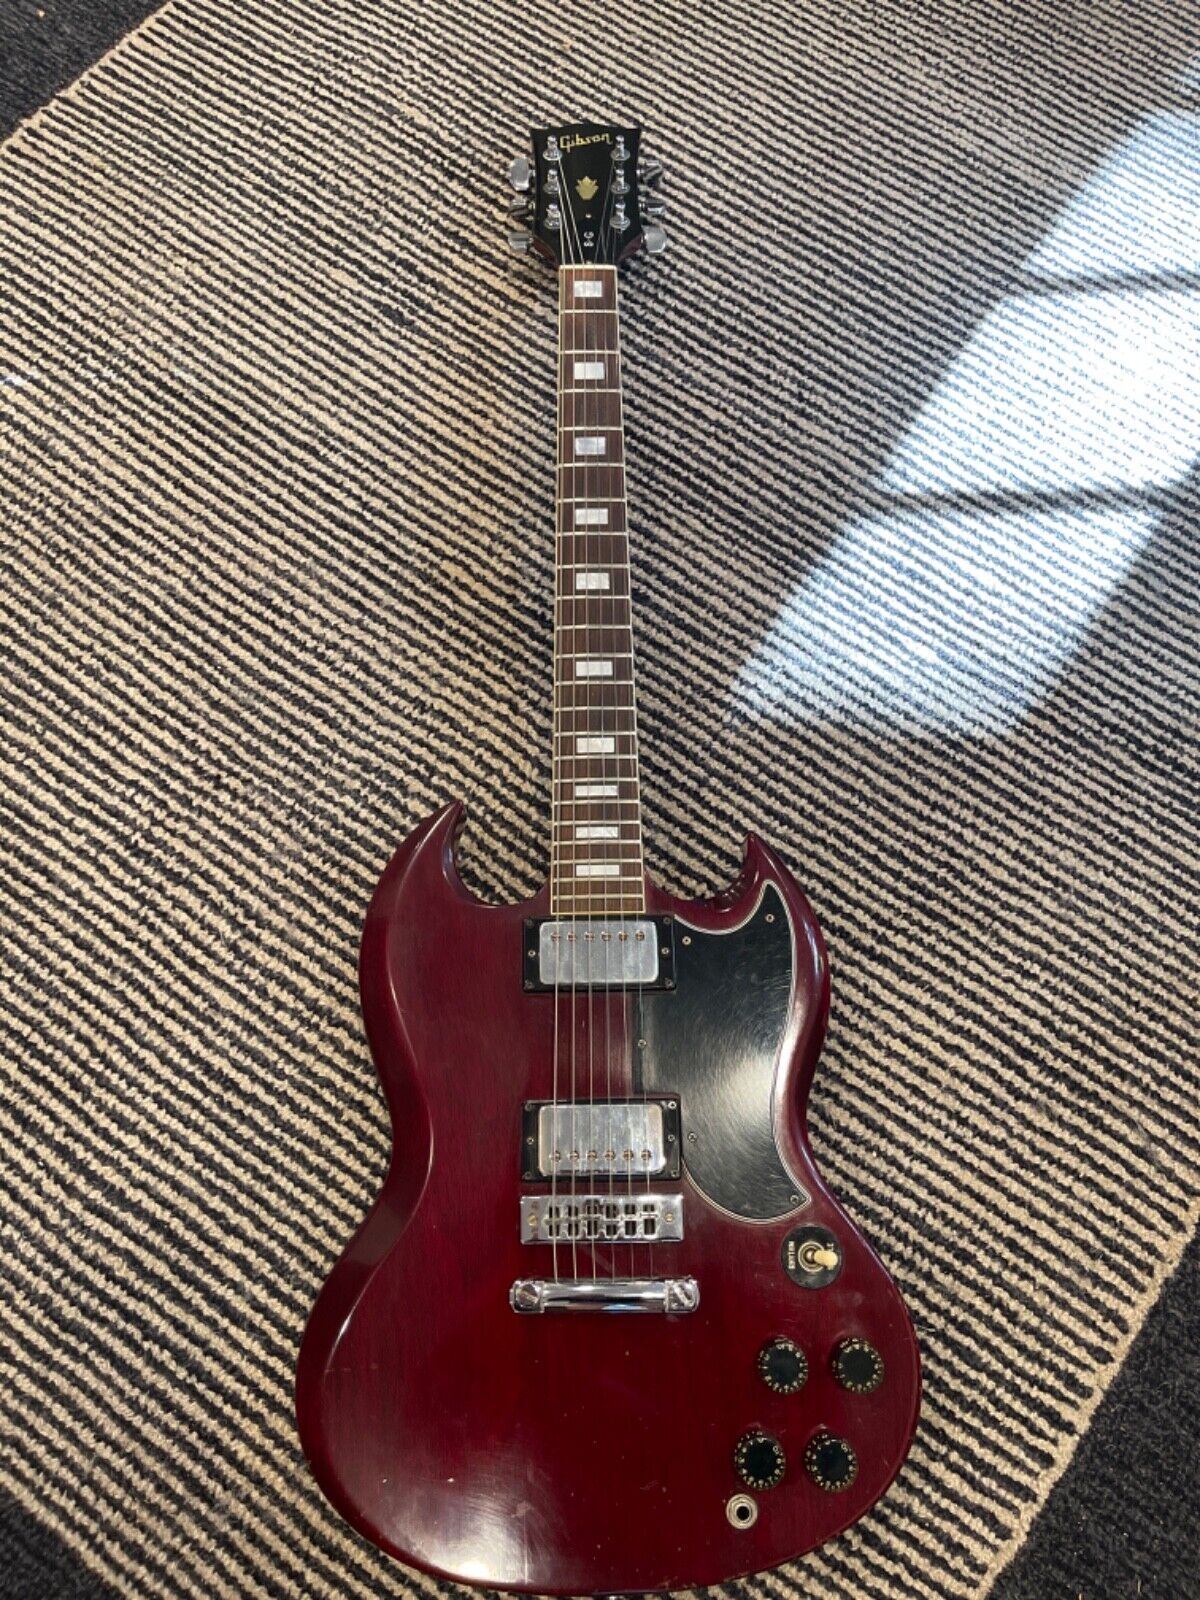 Gibson Sg Standard - 1976 Clean With No Breaks/repairs.  Light 7lbs .04 Oz